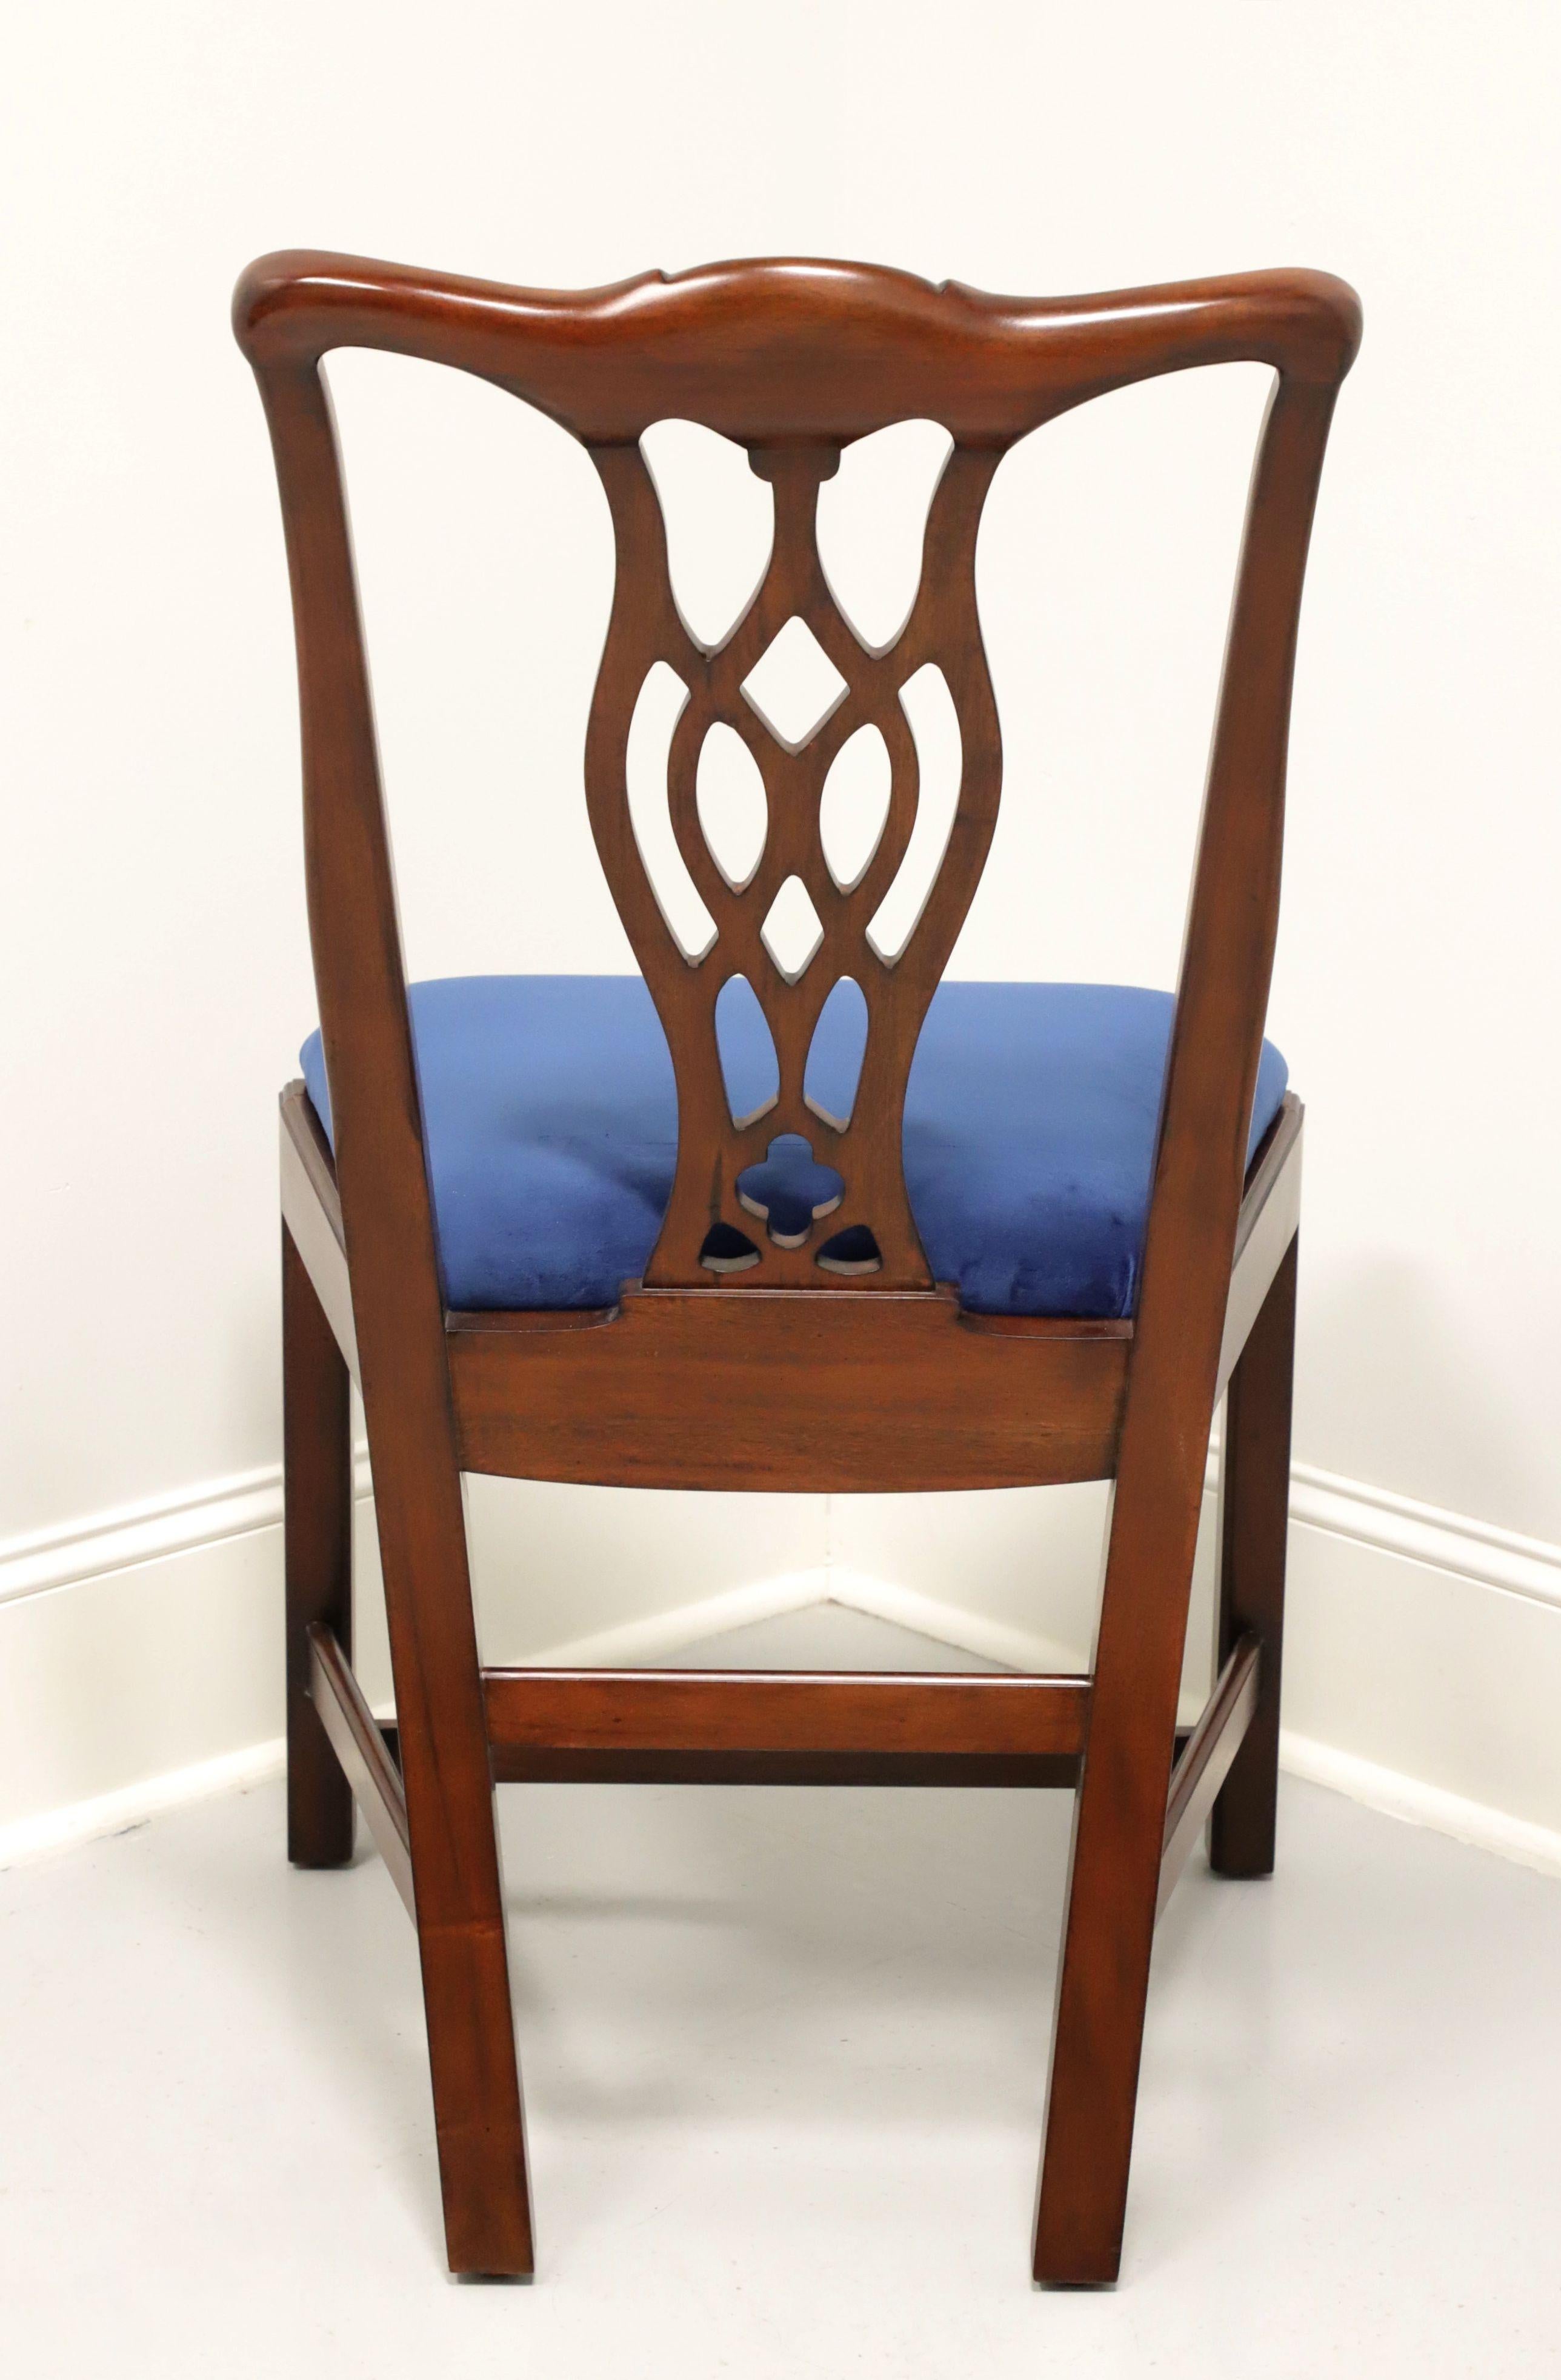 American HICKORY CHAIR Mahogany Chippendale Straight Leg Dining Side Chair - A